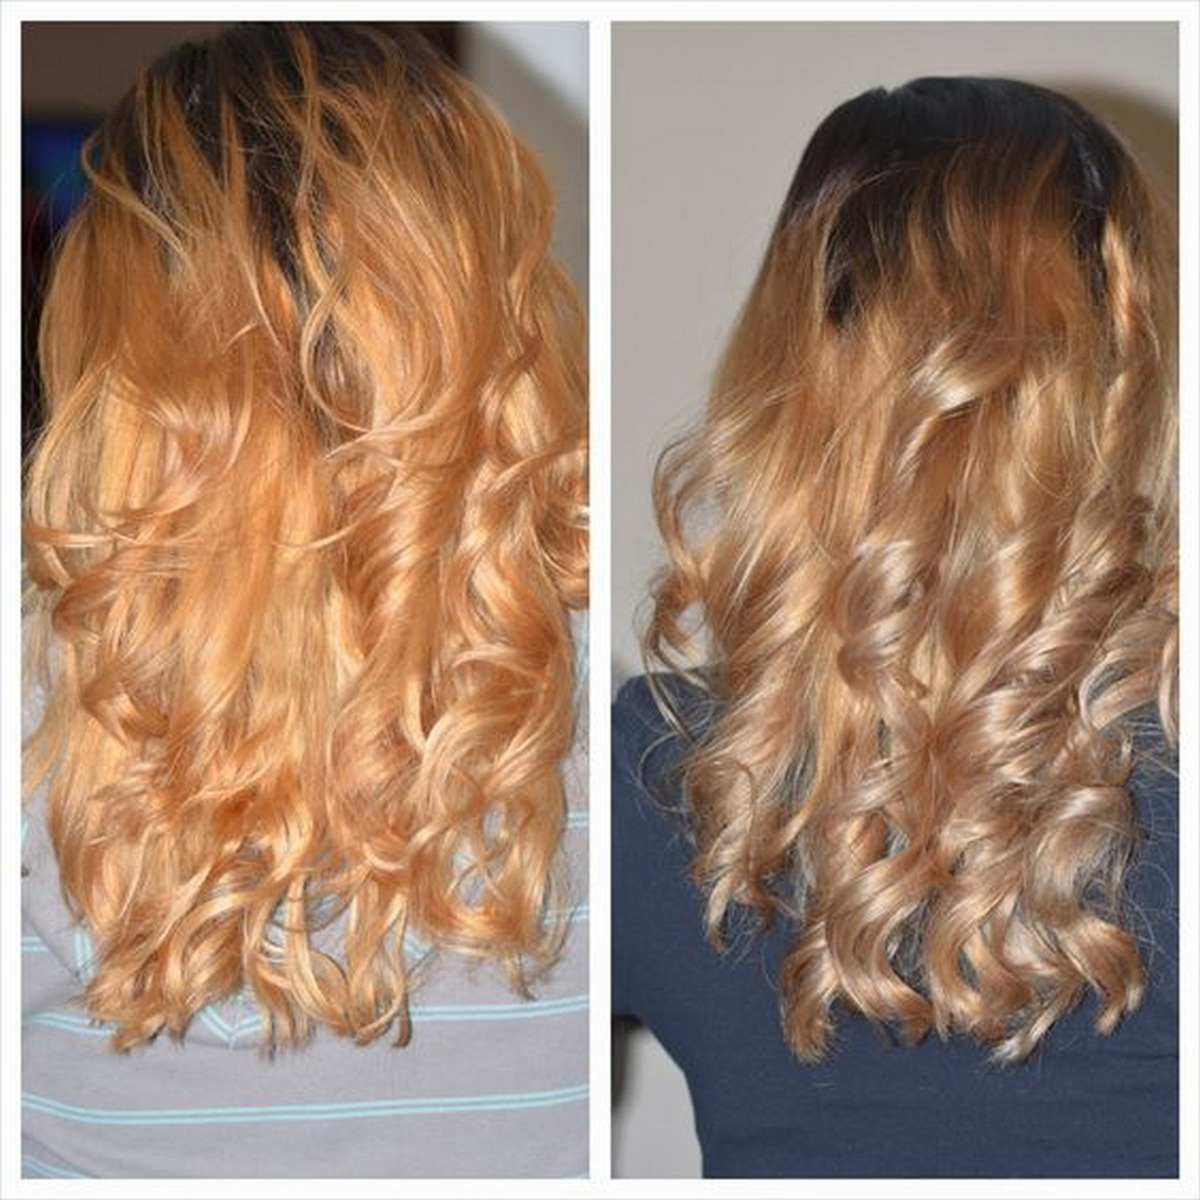 Blonde hair before and after using Wella T27 